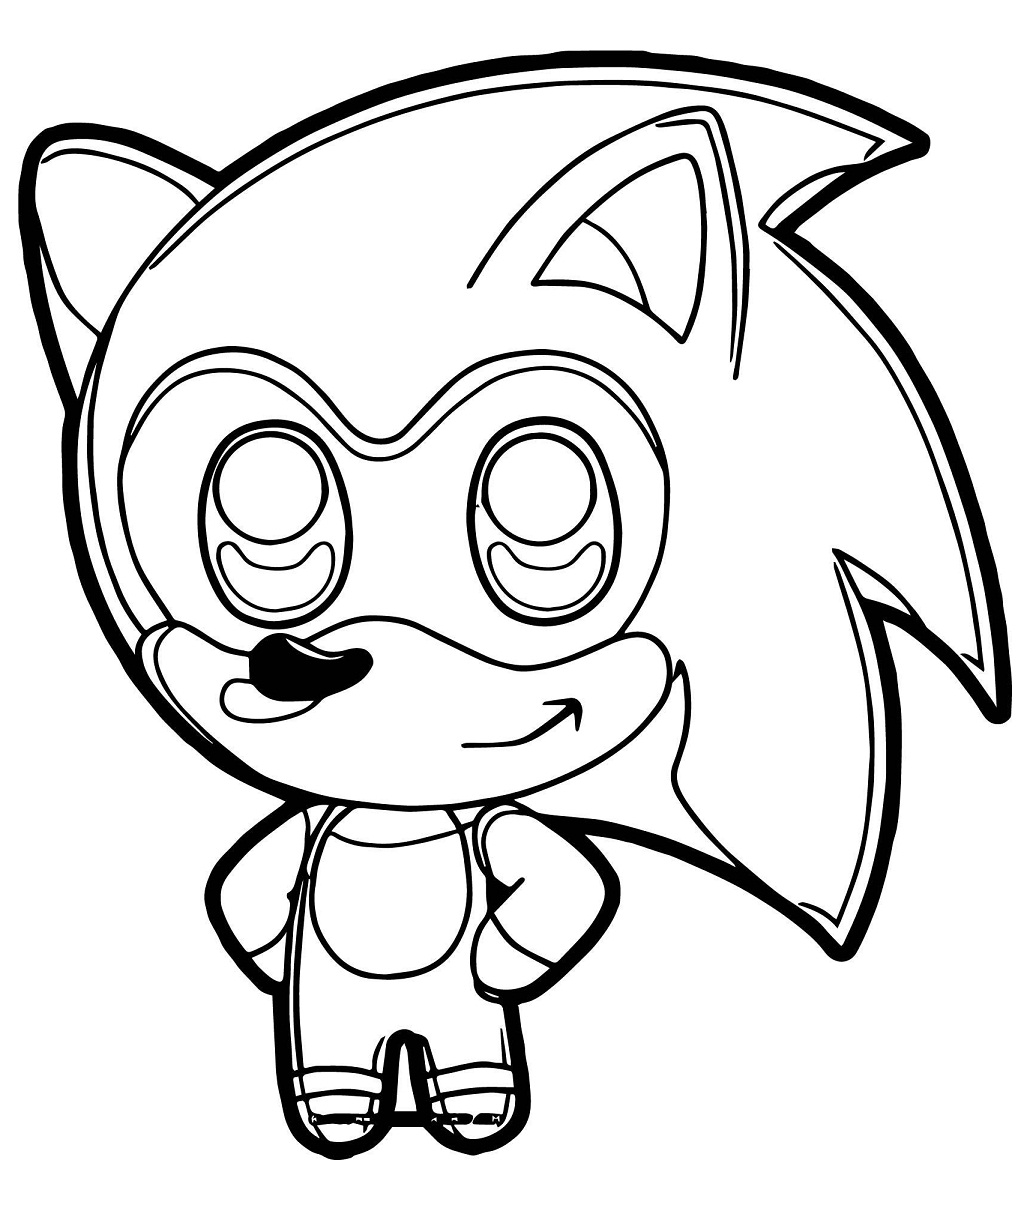 Sonic The Hedgehog Printable Coloring Pages